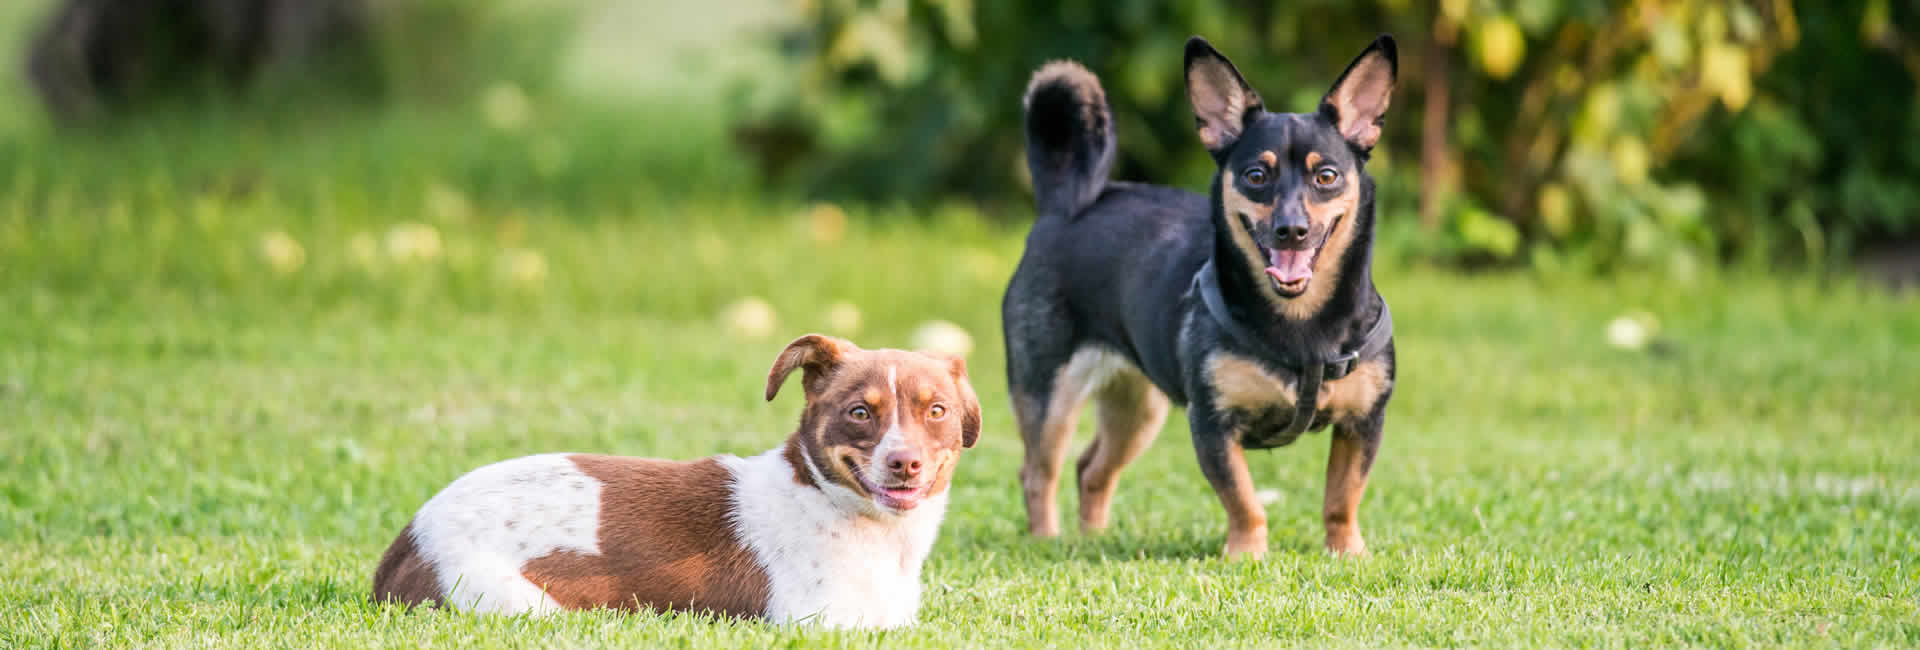 Pet boarding and daycare services offered in Bismarck, ND